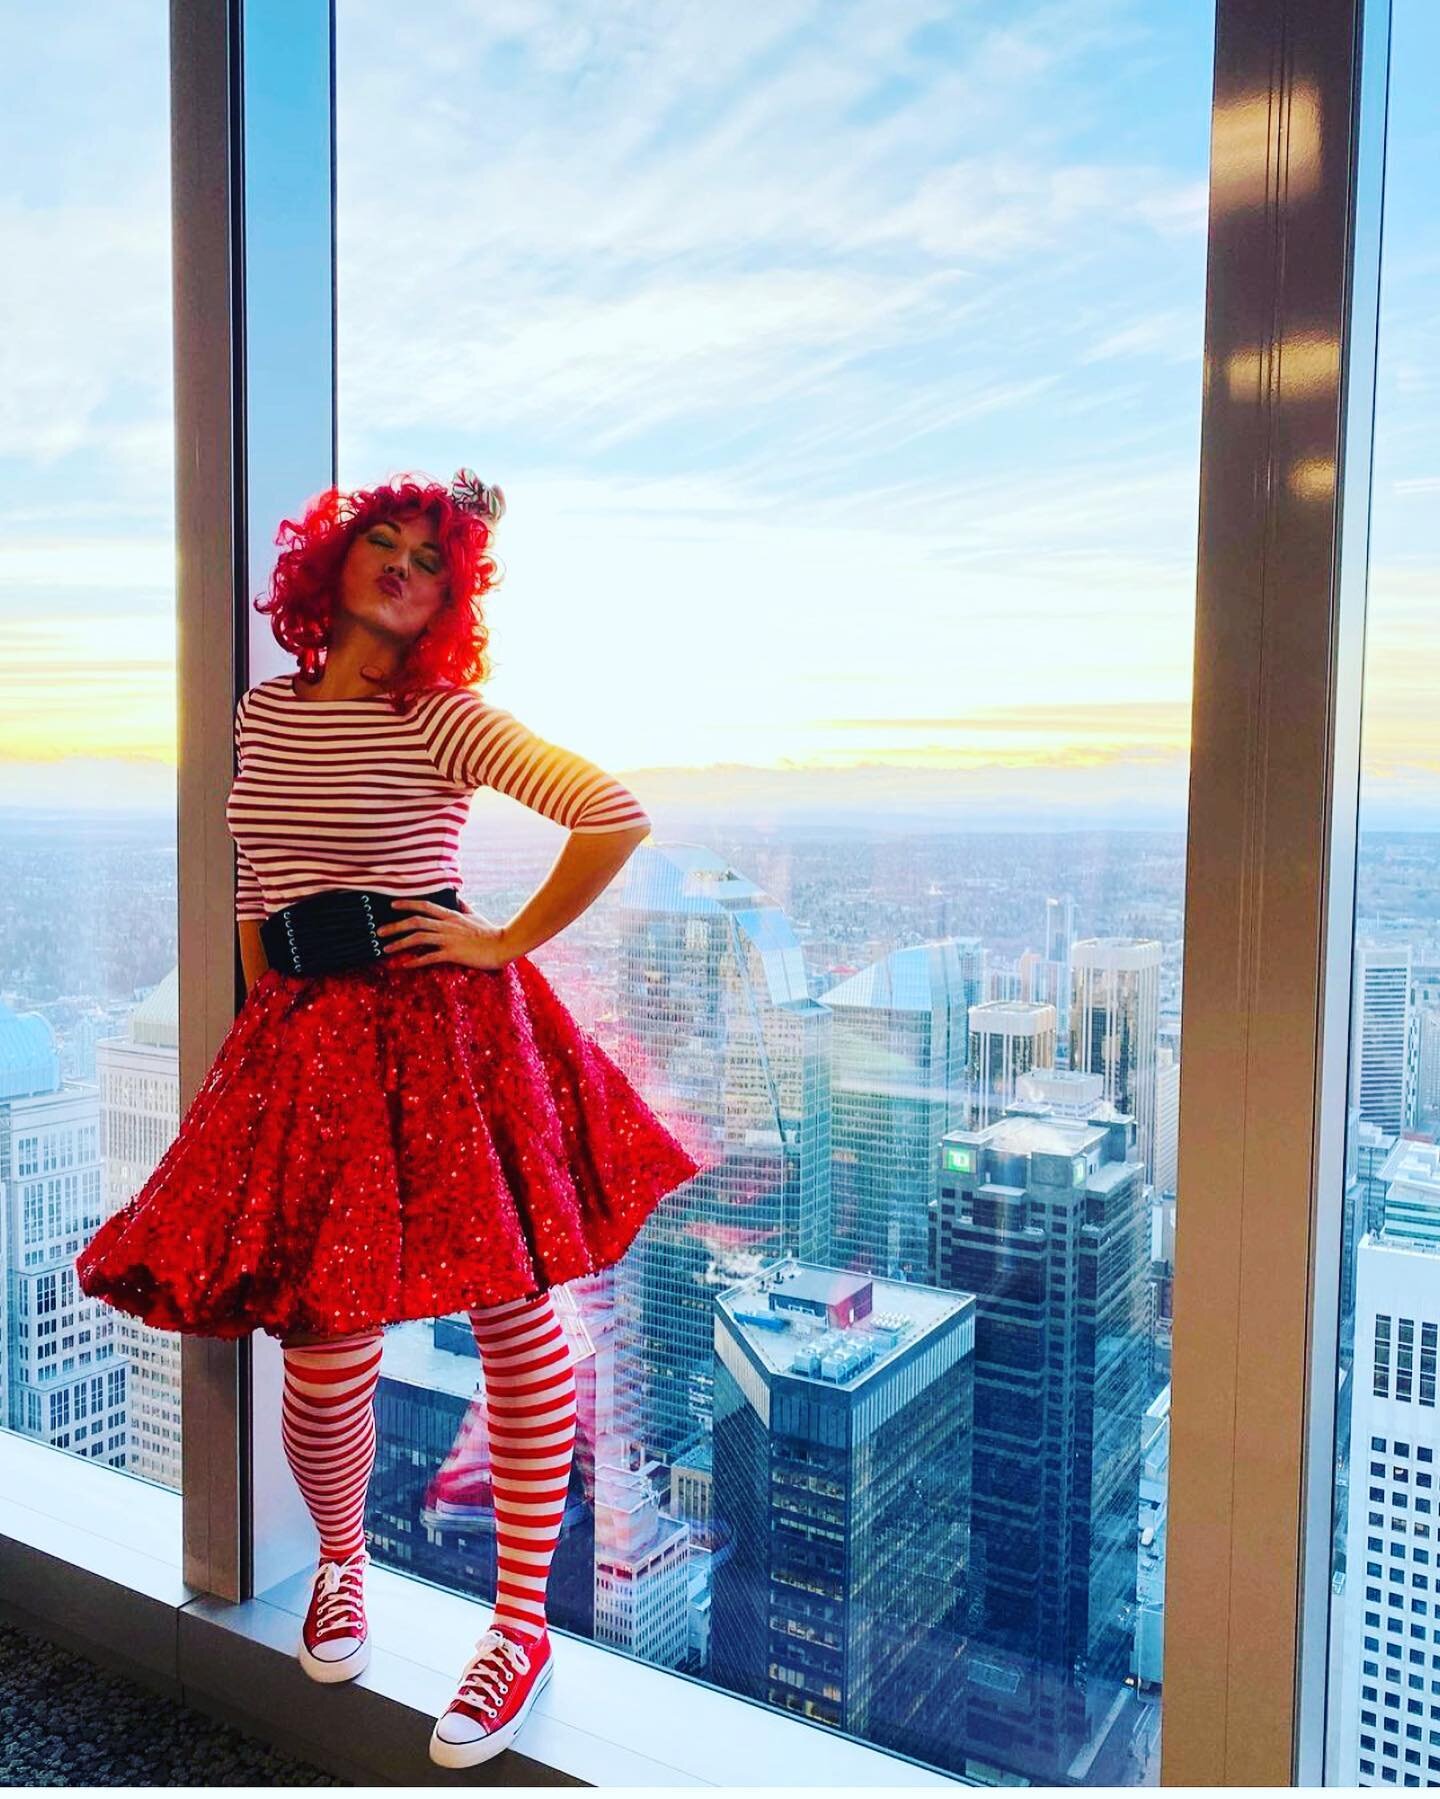 Top of the world! 
Candy Cane Kids -The Musical! 

Calgary&rsquo;s Christmas Musical! 

Do we have shows in YYC this holiday season? 

We sure do! 

Looking for corporate family Christmas  entertainment? 

Contact us!! 

Info in bio! 

#christmasente